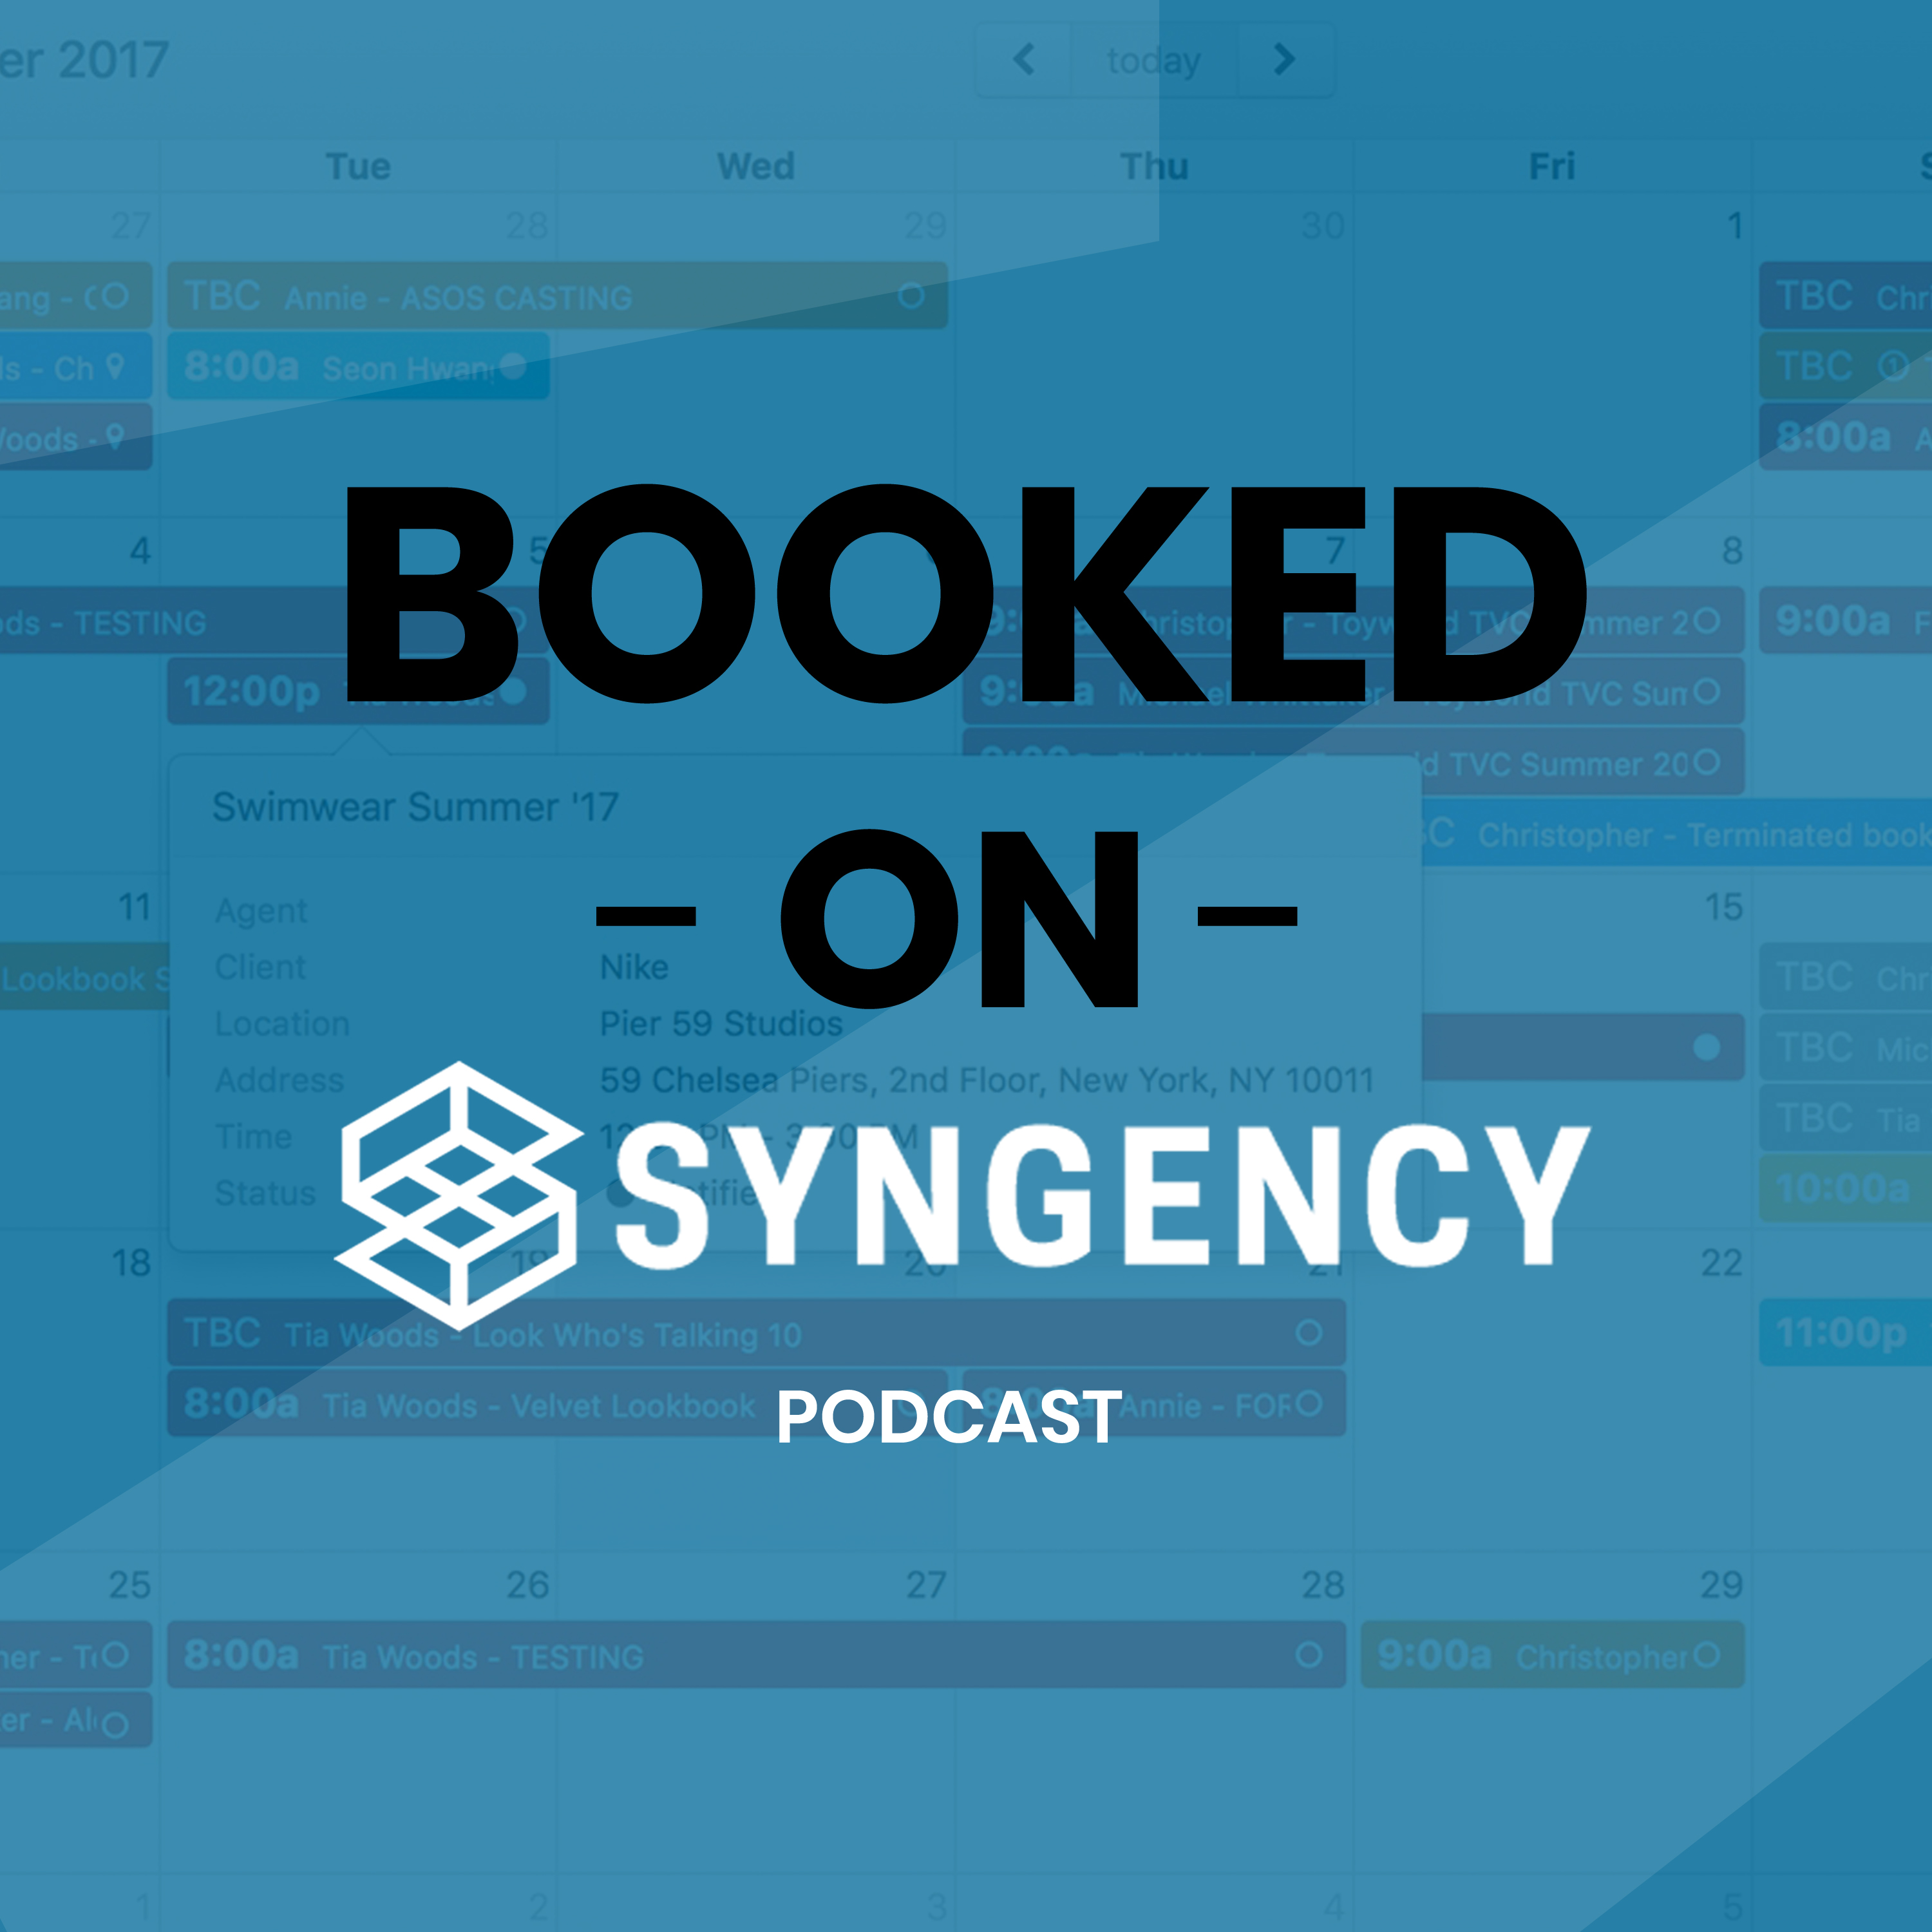 Booked on Syngency Podcast.jpg